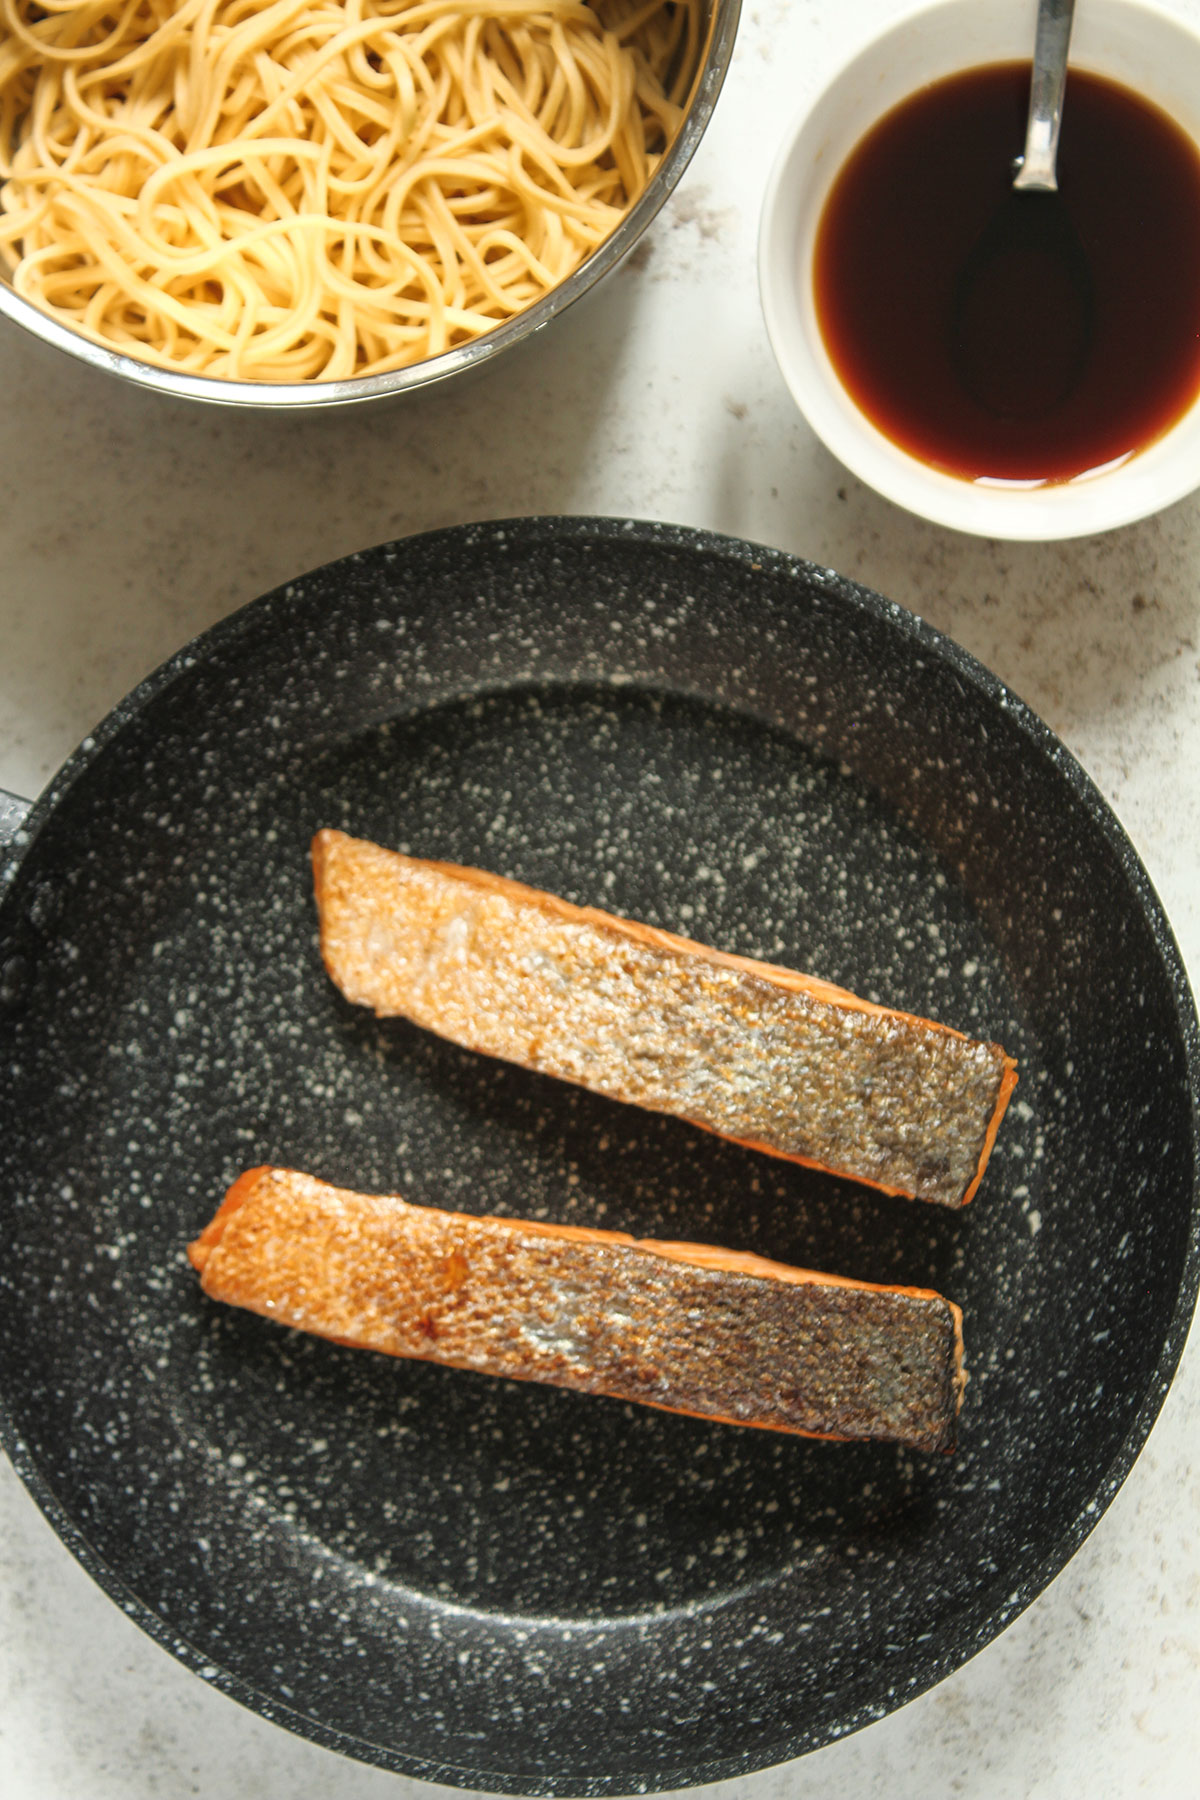 Two cooked salmon fillets in a frying pan on a white background.